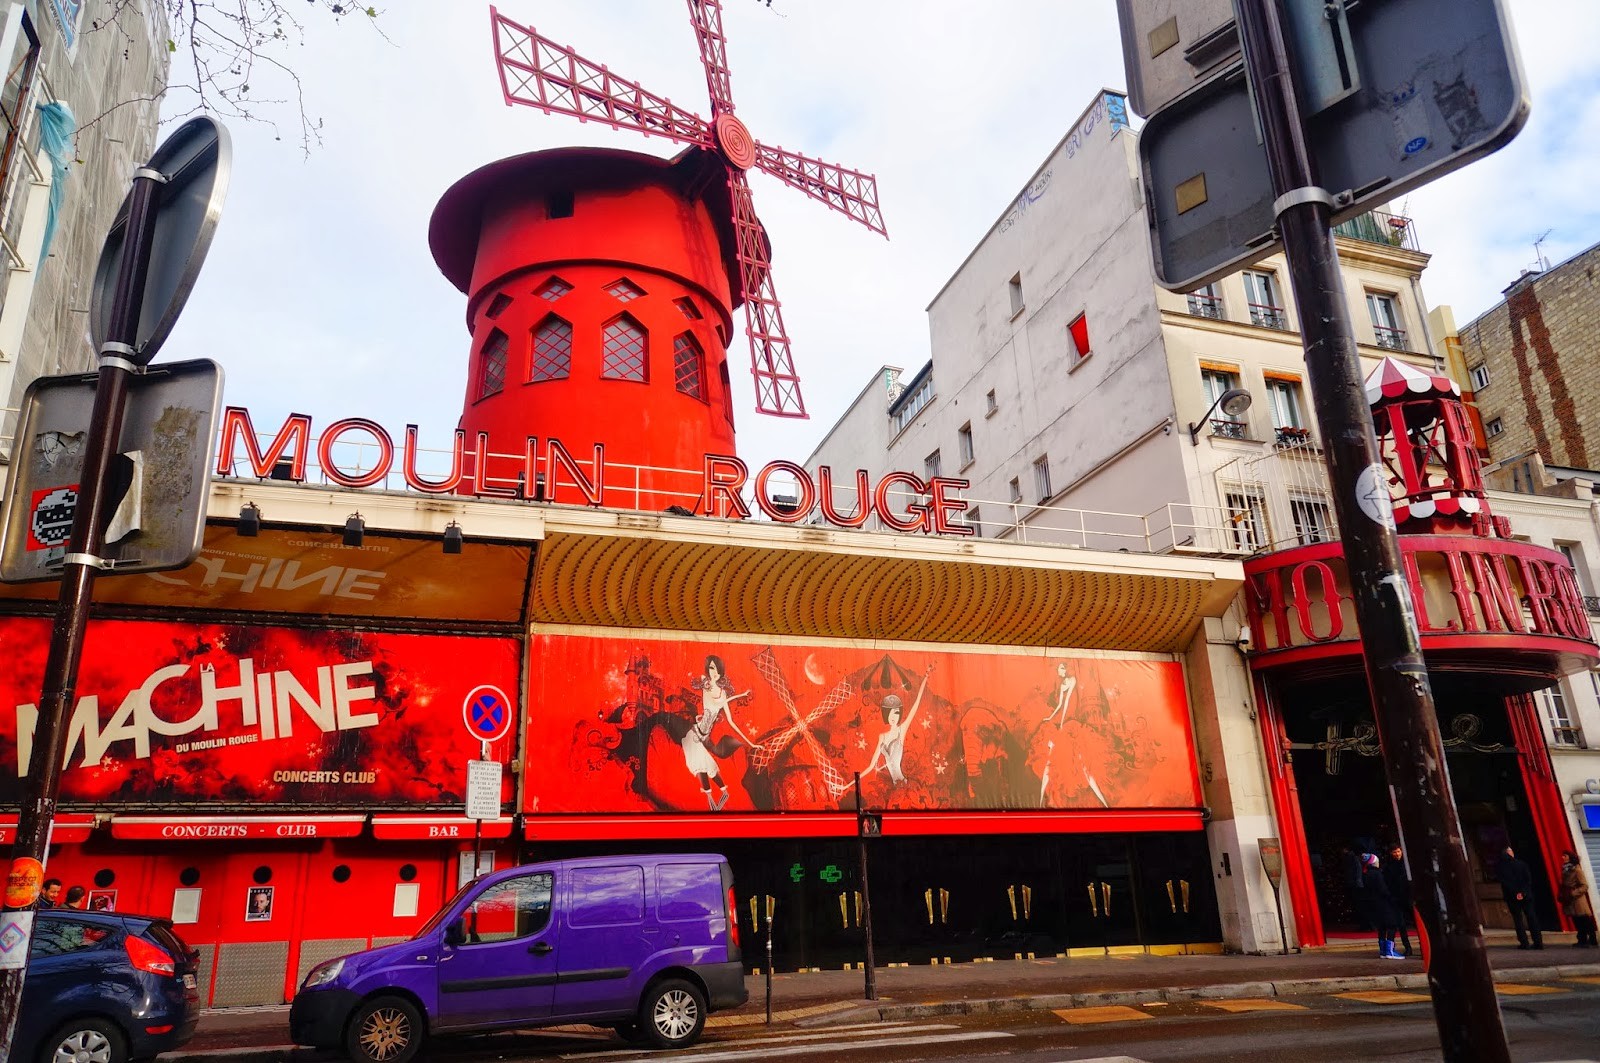 moulin-rouge